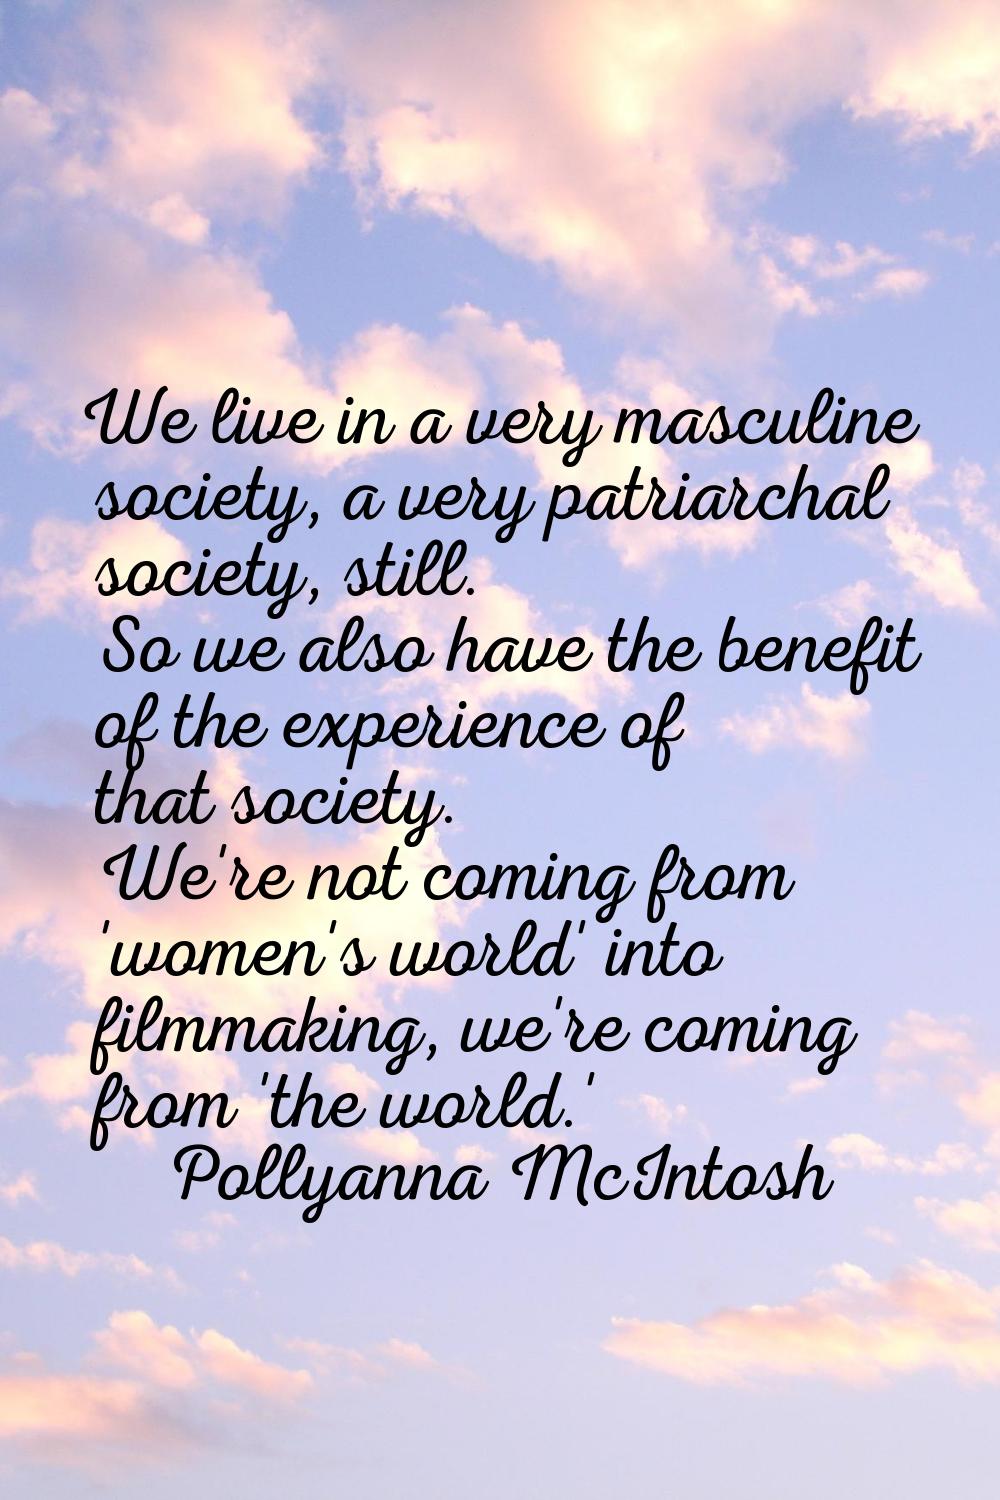 We live in a very masculine society, a very patriarchal society, still. So we also have the benefit